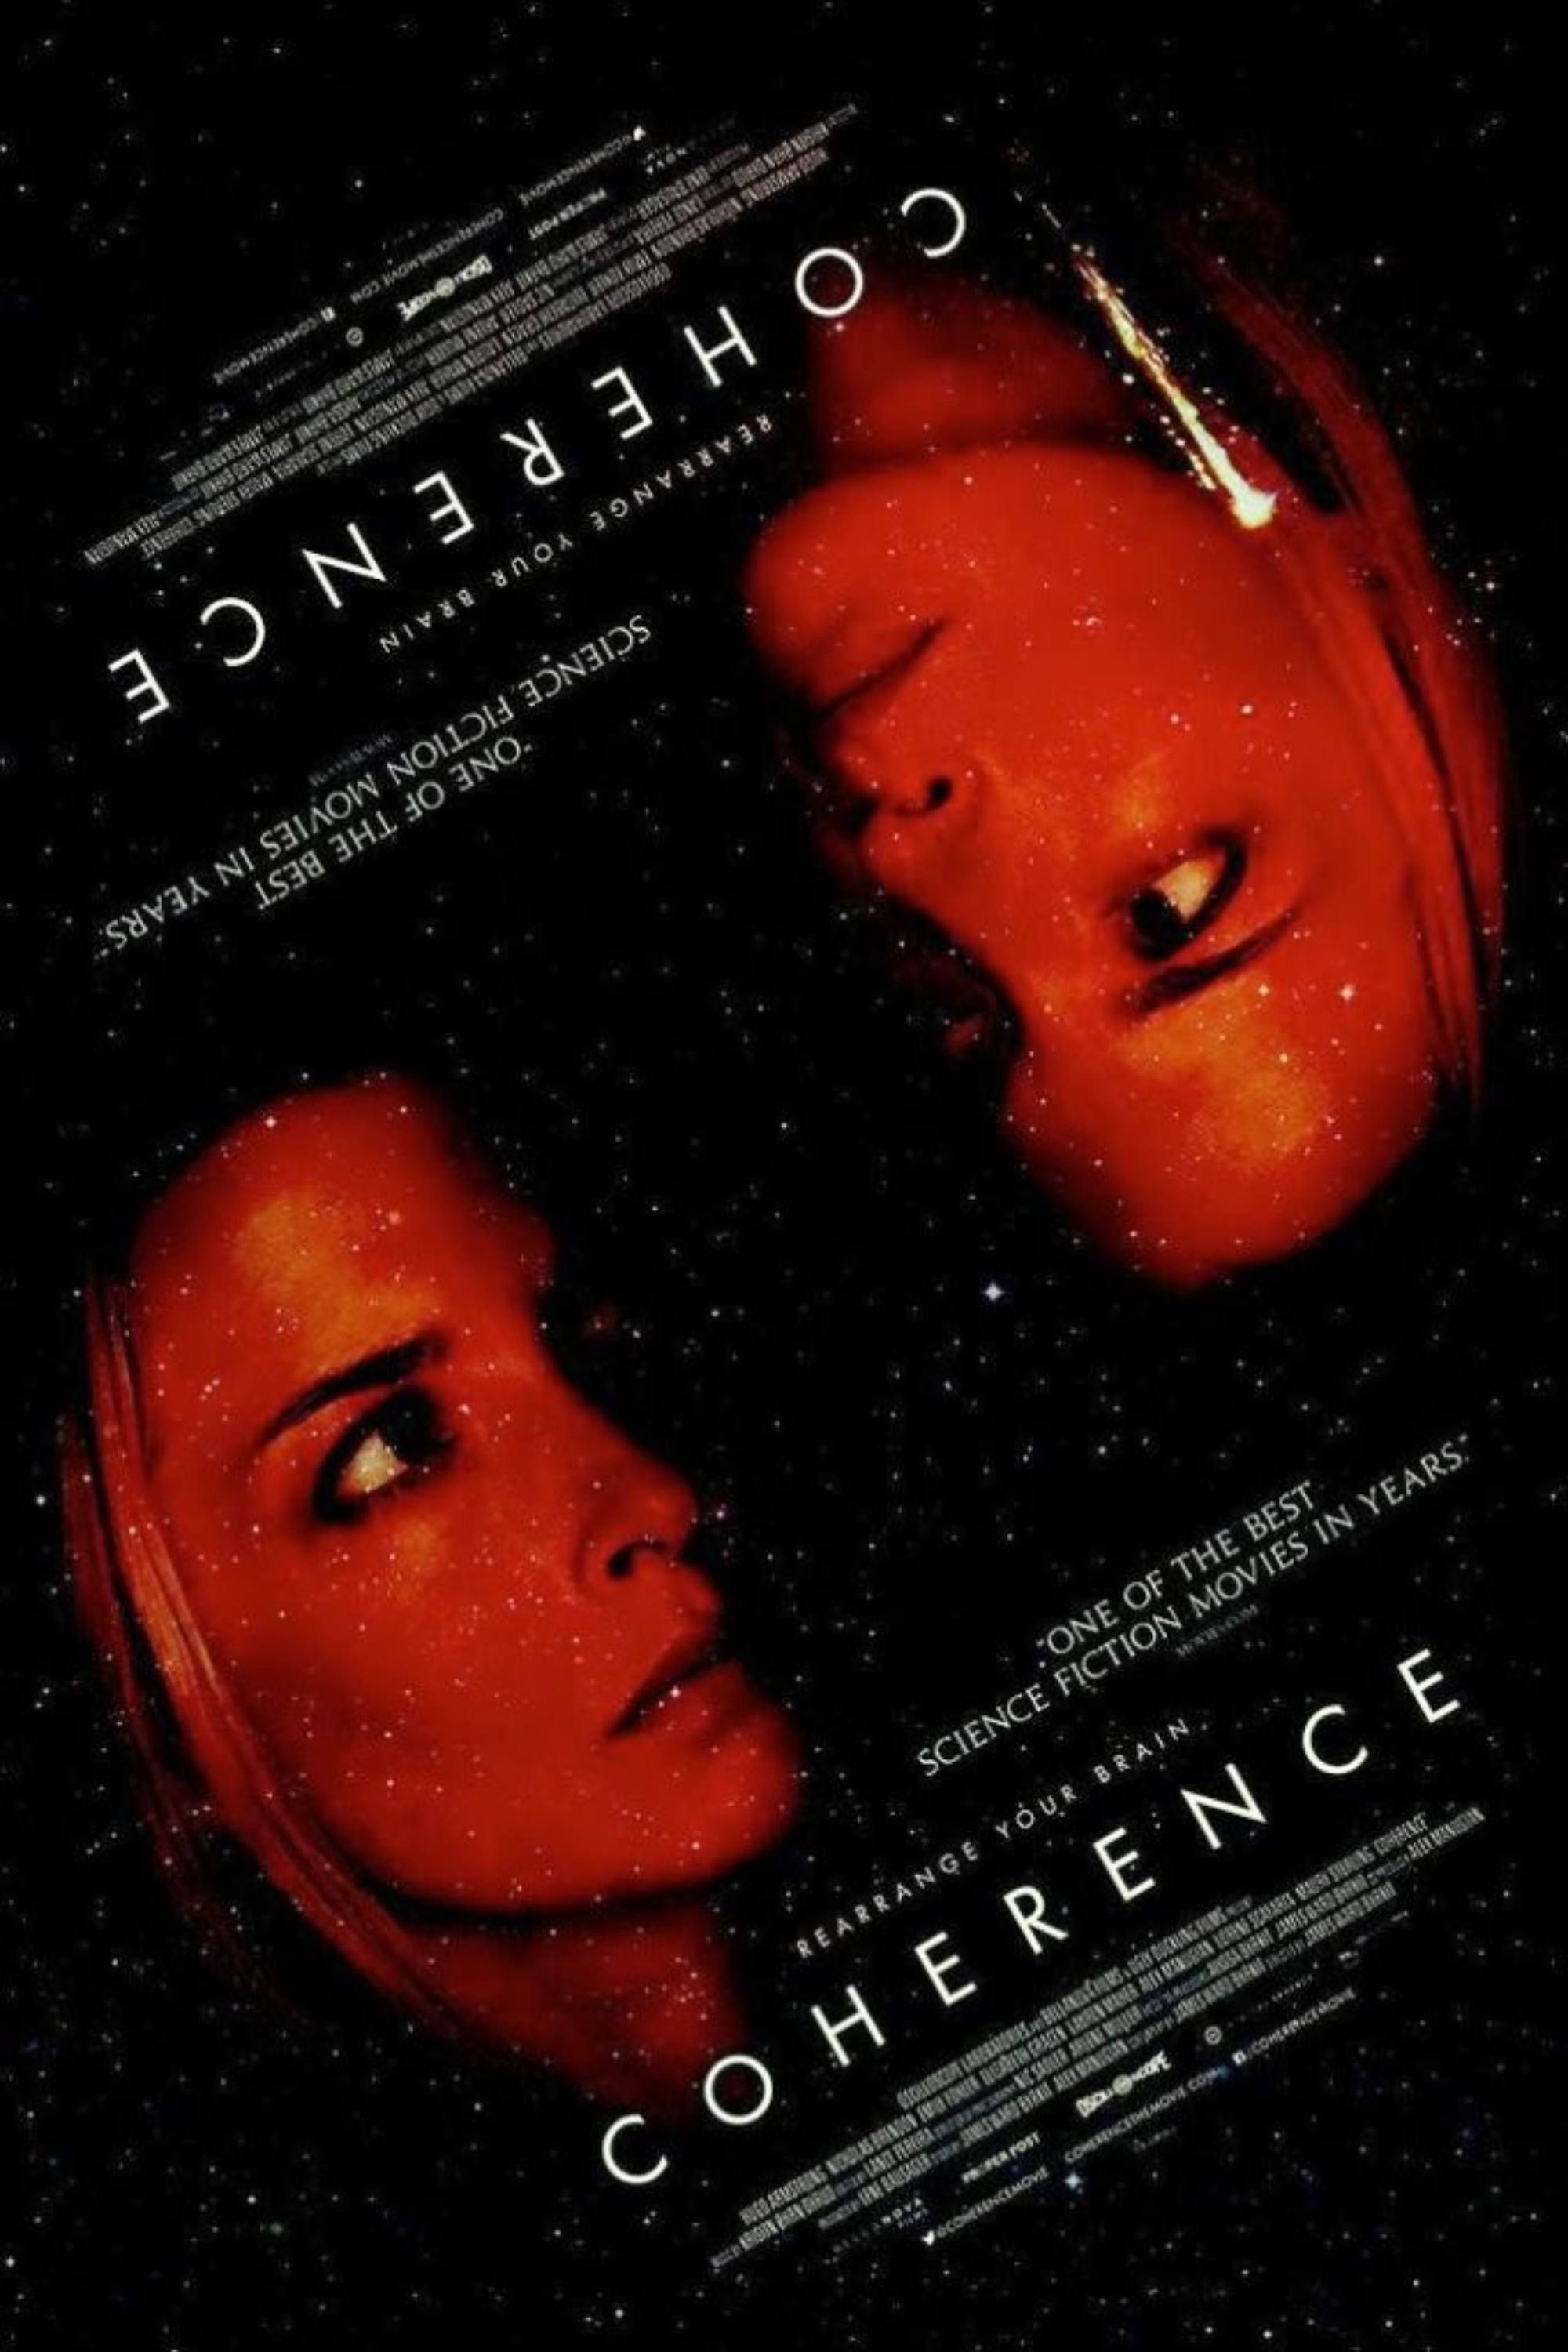 Coherence (2013) - Poster